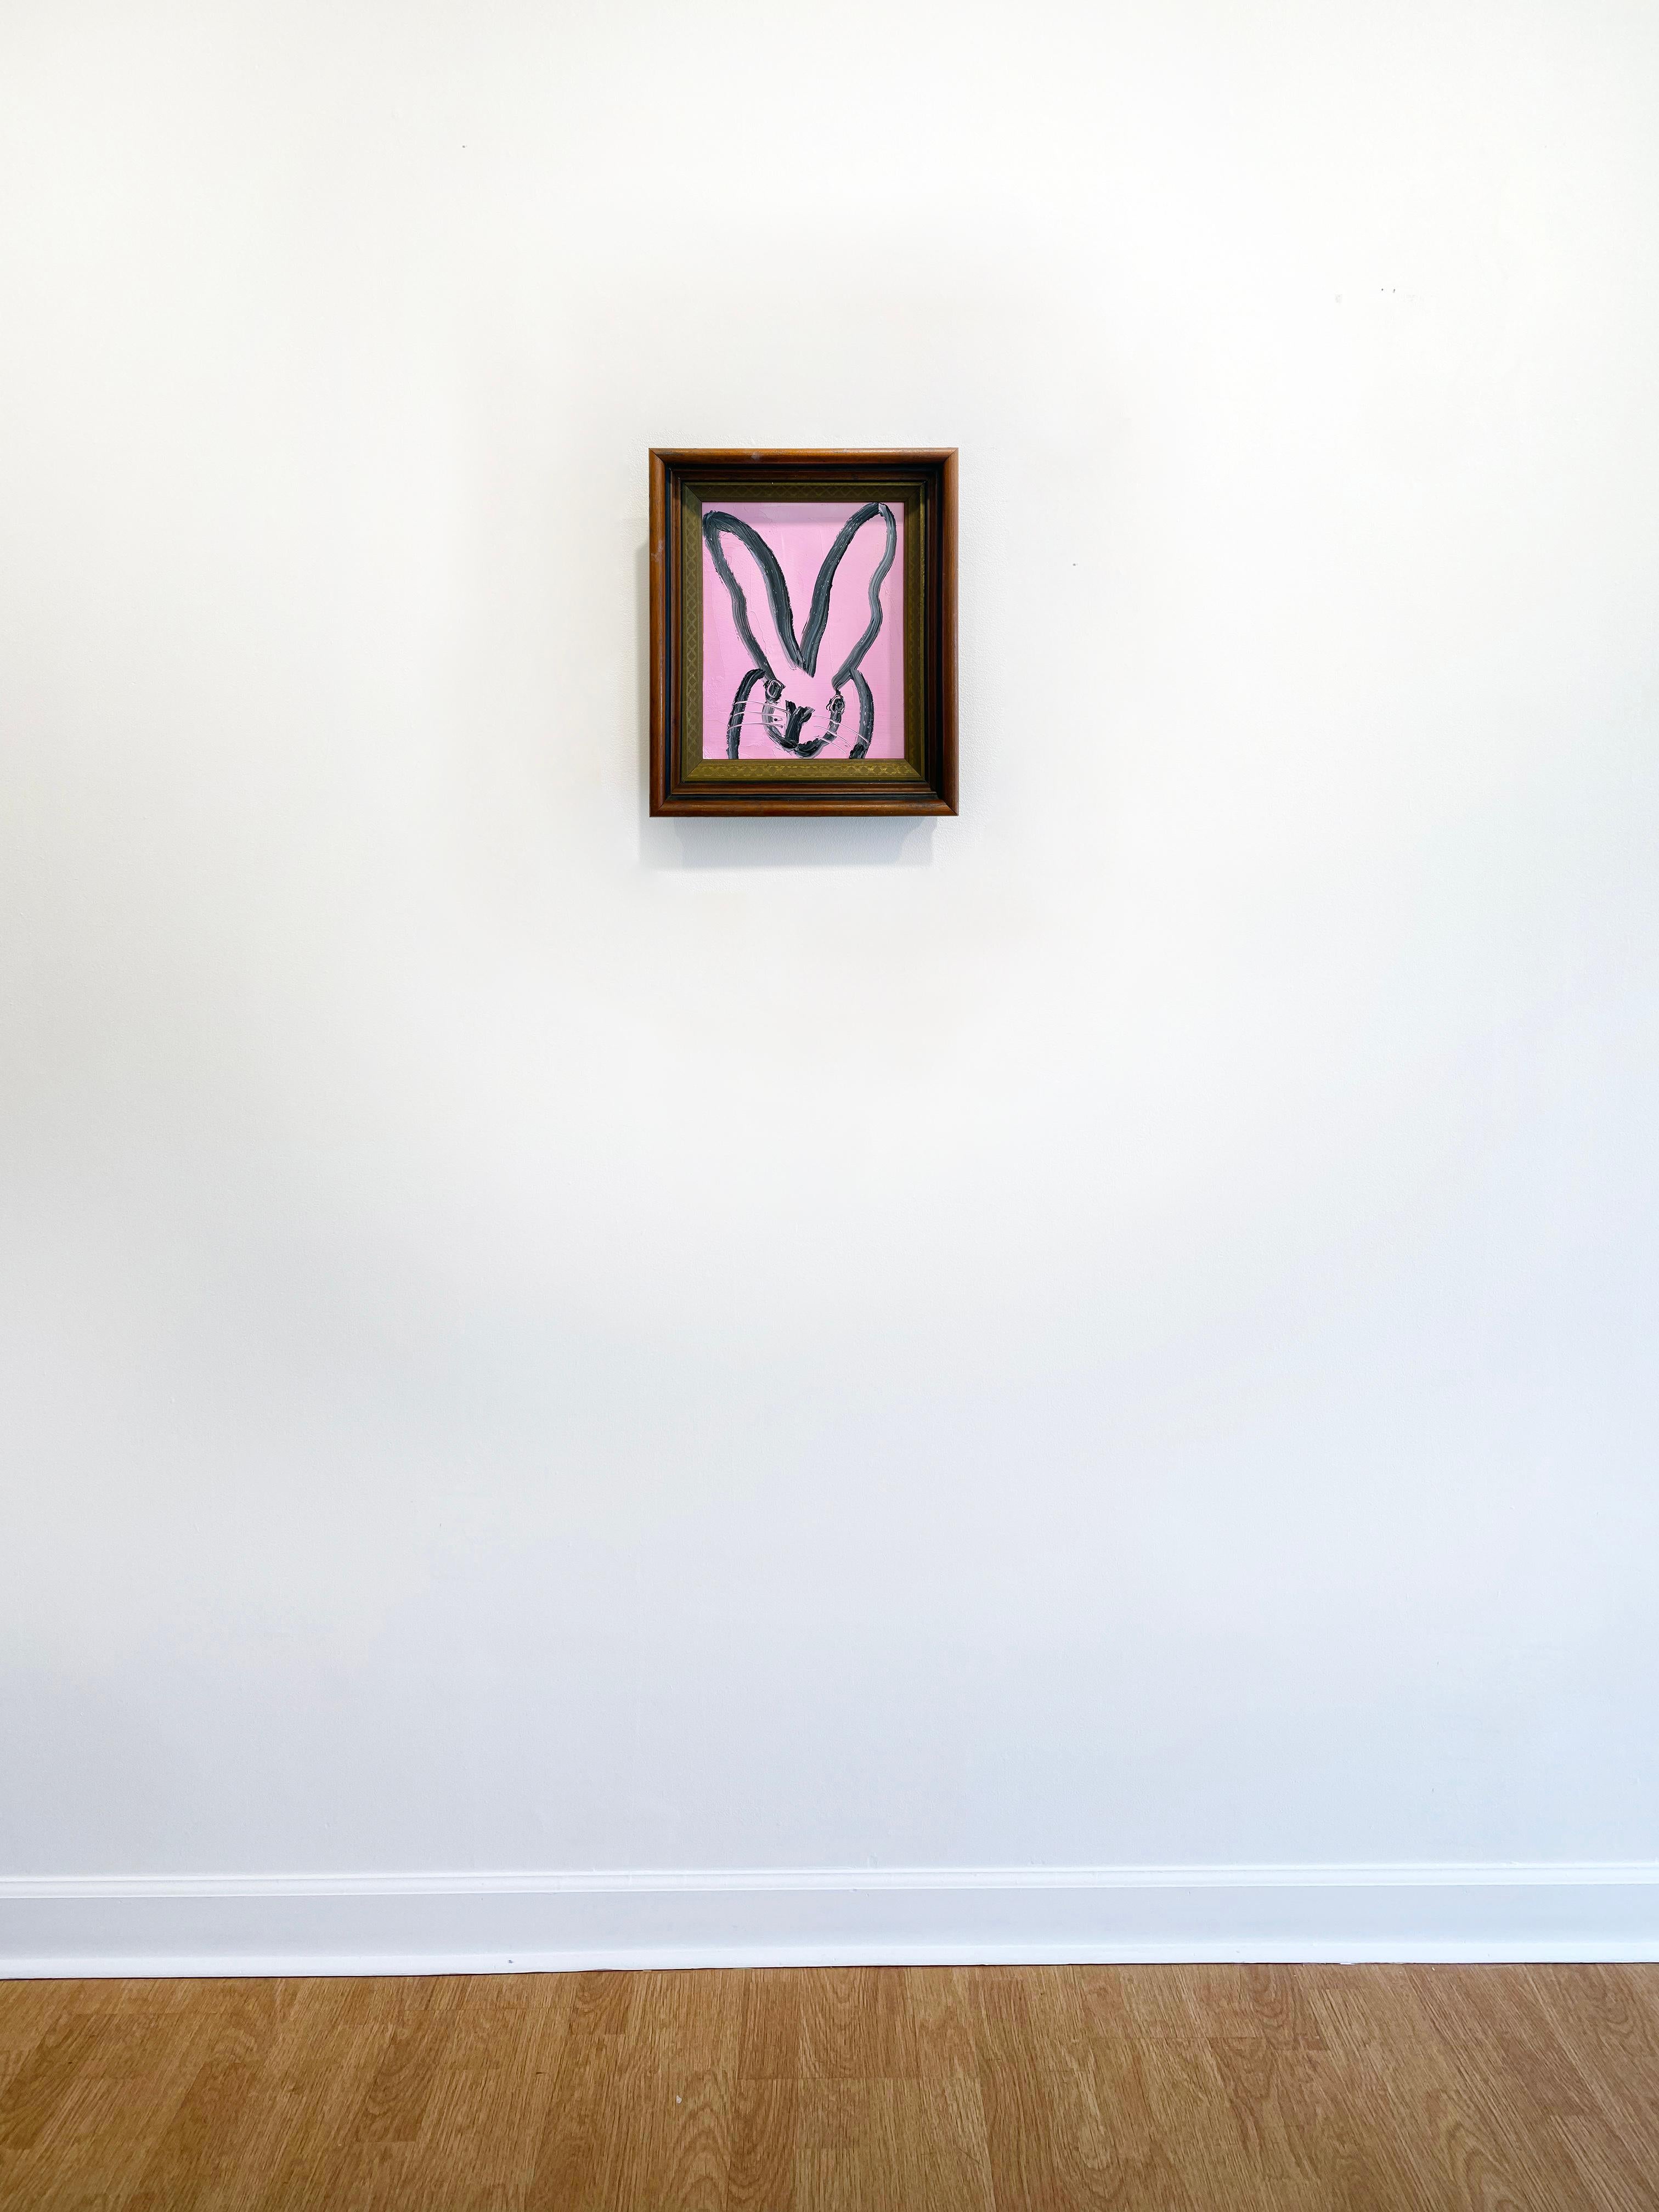 'Poly' by Hunt Slonem, 2021. Oil on wood, 10 x 8 in. Framed size is 13 x 11 in. This painting features Slonem's signature bunny outlined in black on a bright pink background. This charming bunny features an expressive face and long slender ears. 